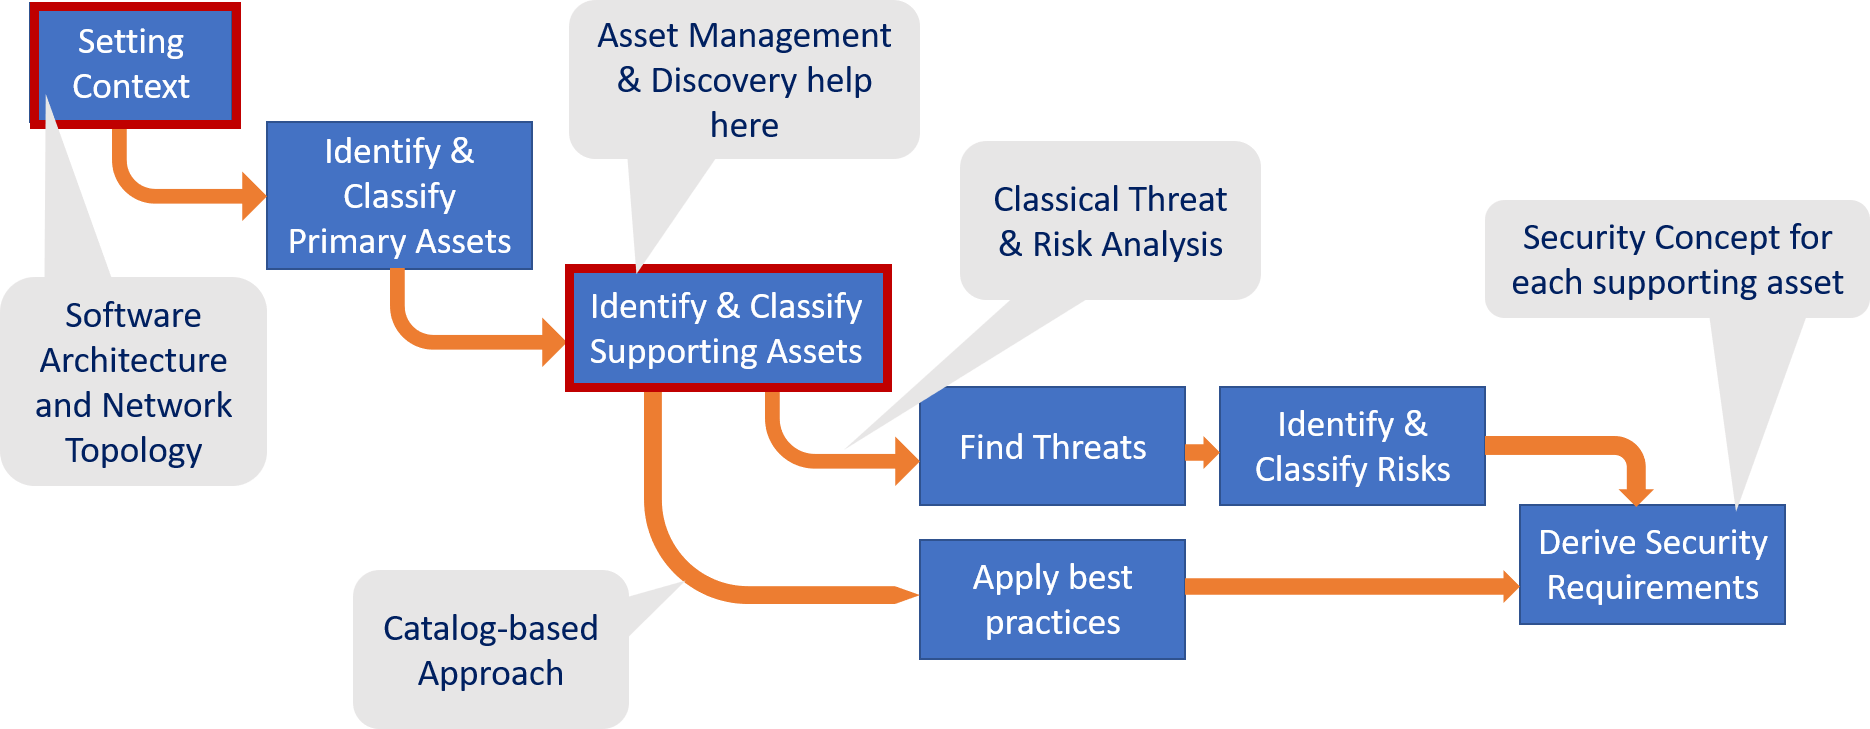 threat and risk analysis